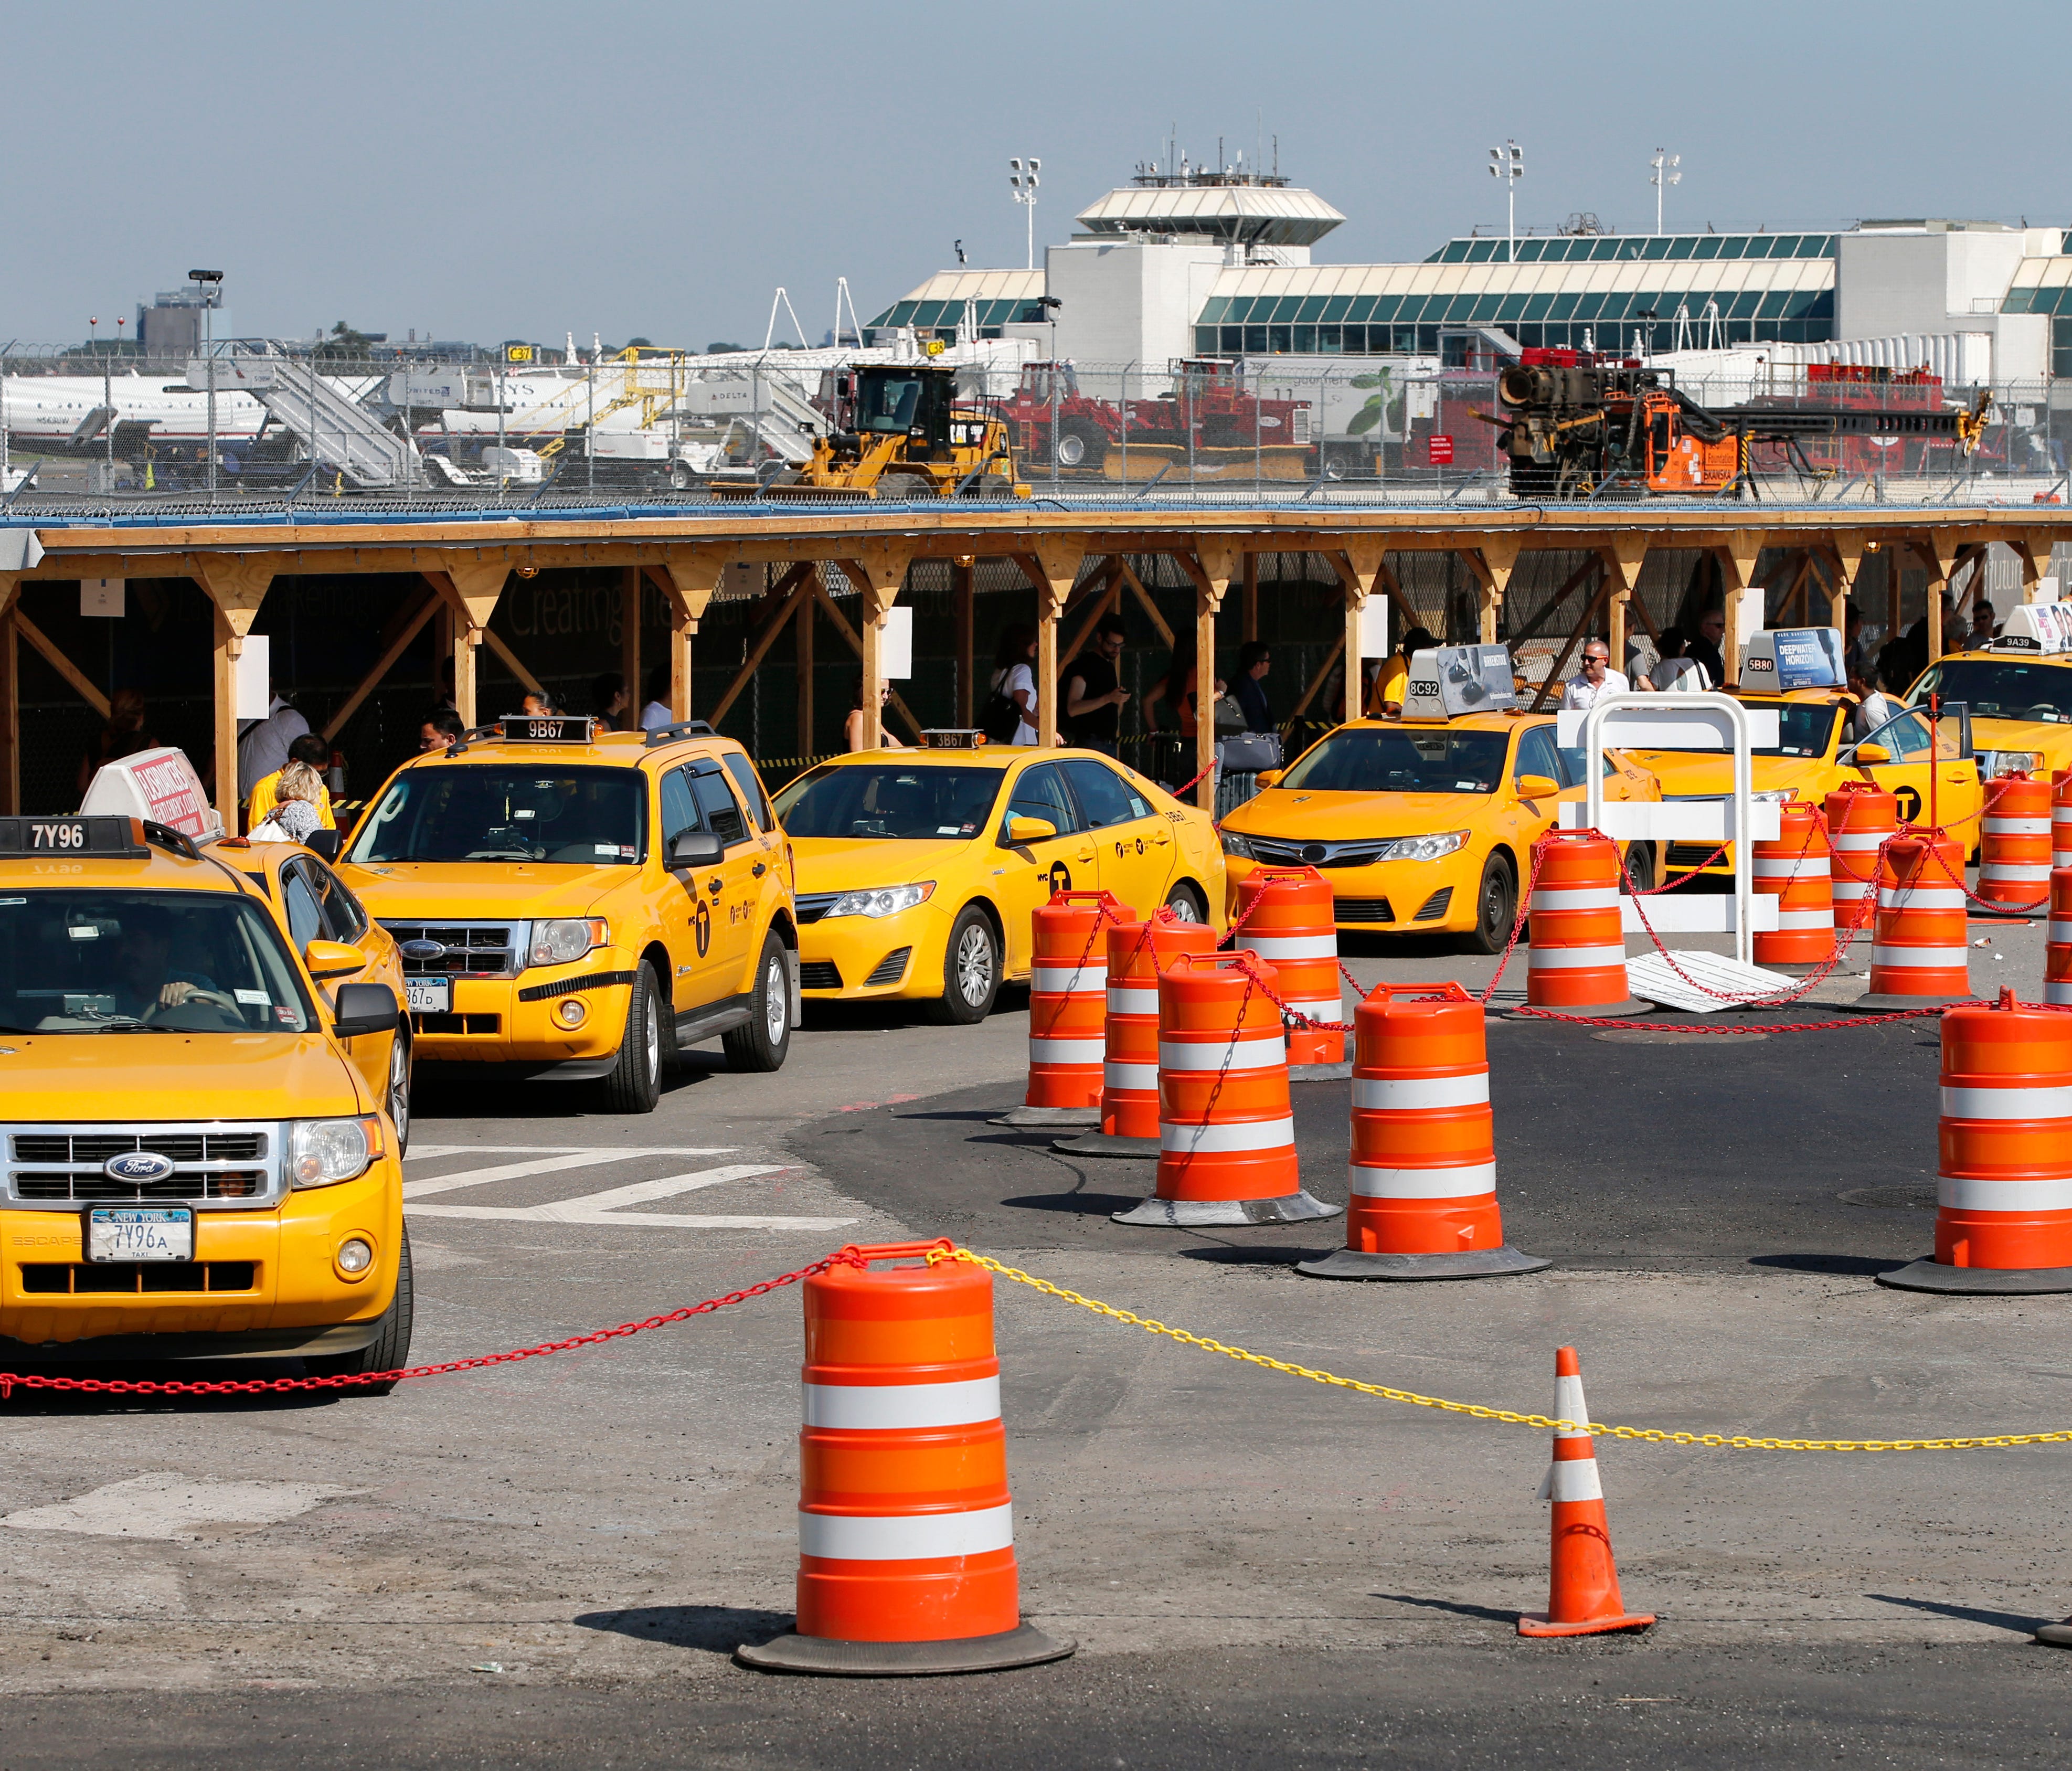 In this Aug. 24, 2016, photo, taxis line up to pick up arriving passengers near Terminal B at LaGuardia Airport in New York, where a $4 billion renovation is underway.